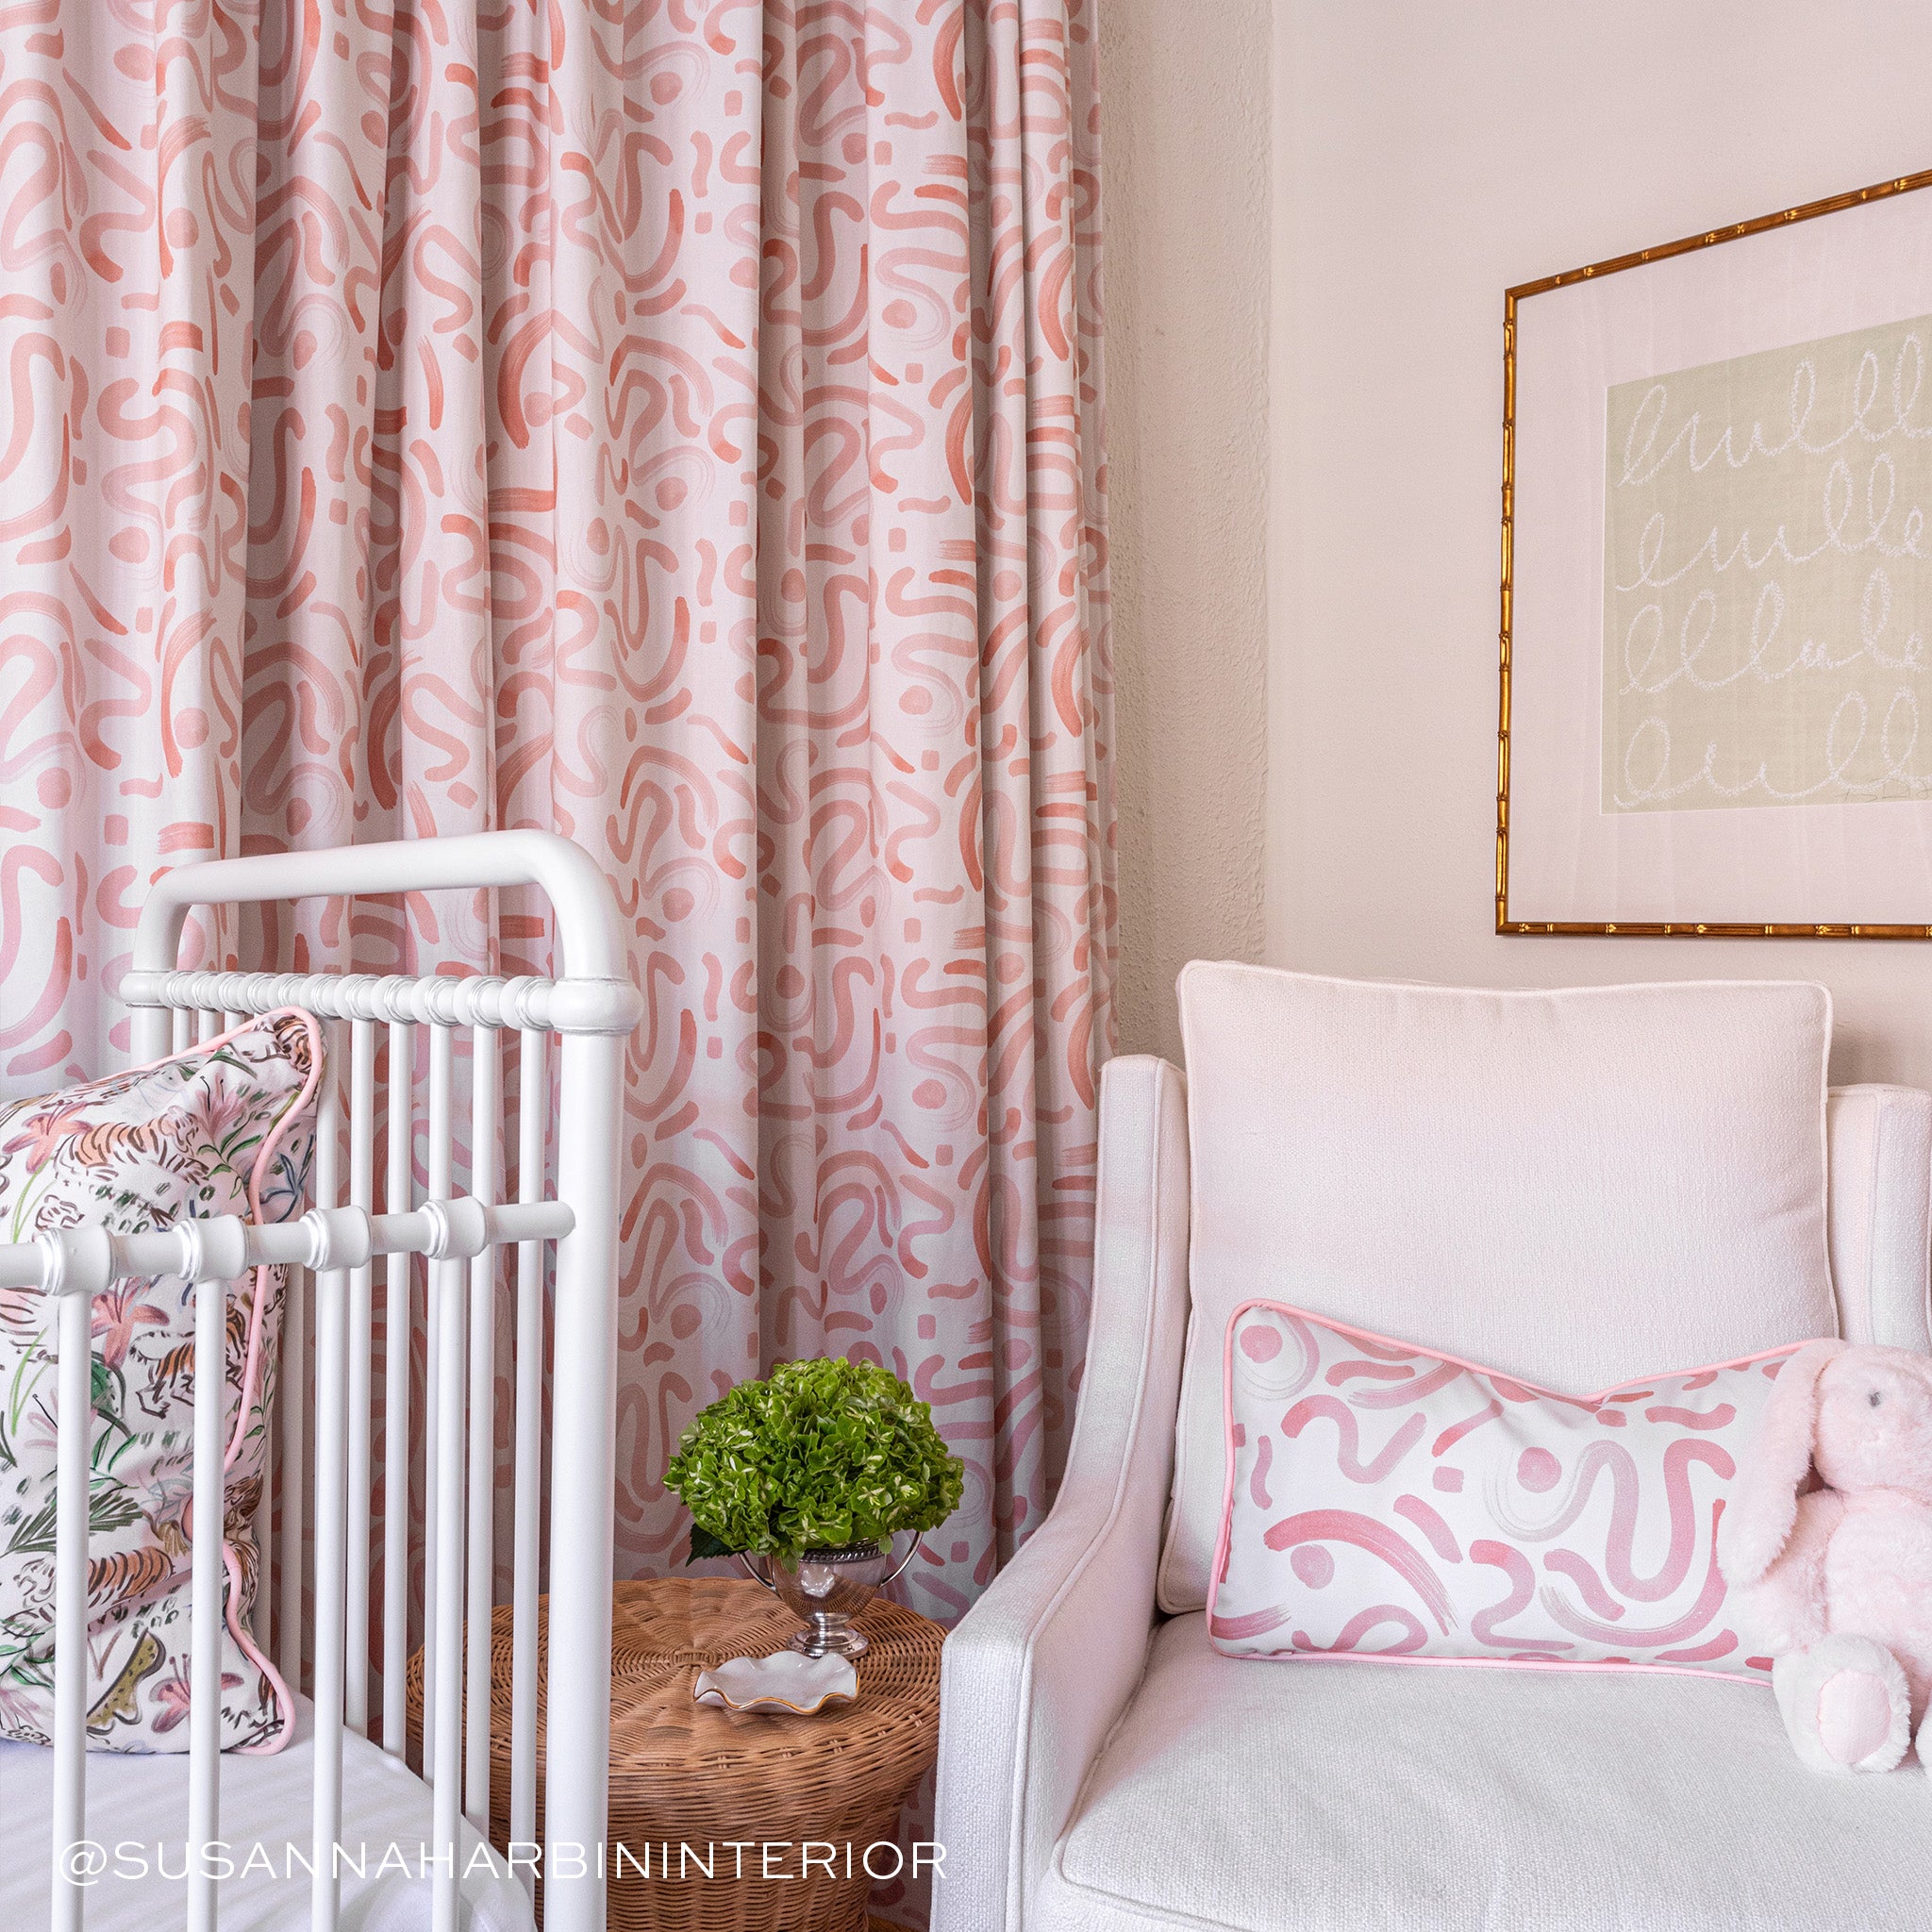 Nursery room corner styled with Pink Graphic Printed Lumbar on Pink Sofa Chair next to white crib with Pink Chinoiserie Printed Pillow. Photo taken by Susanna Harbin Interiors